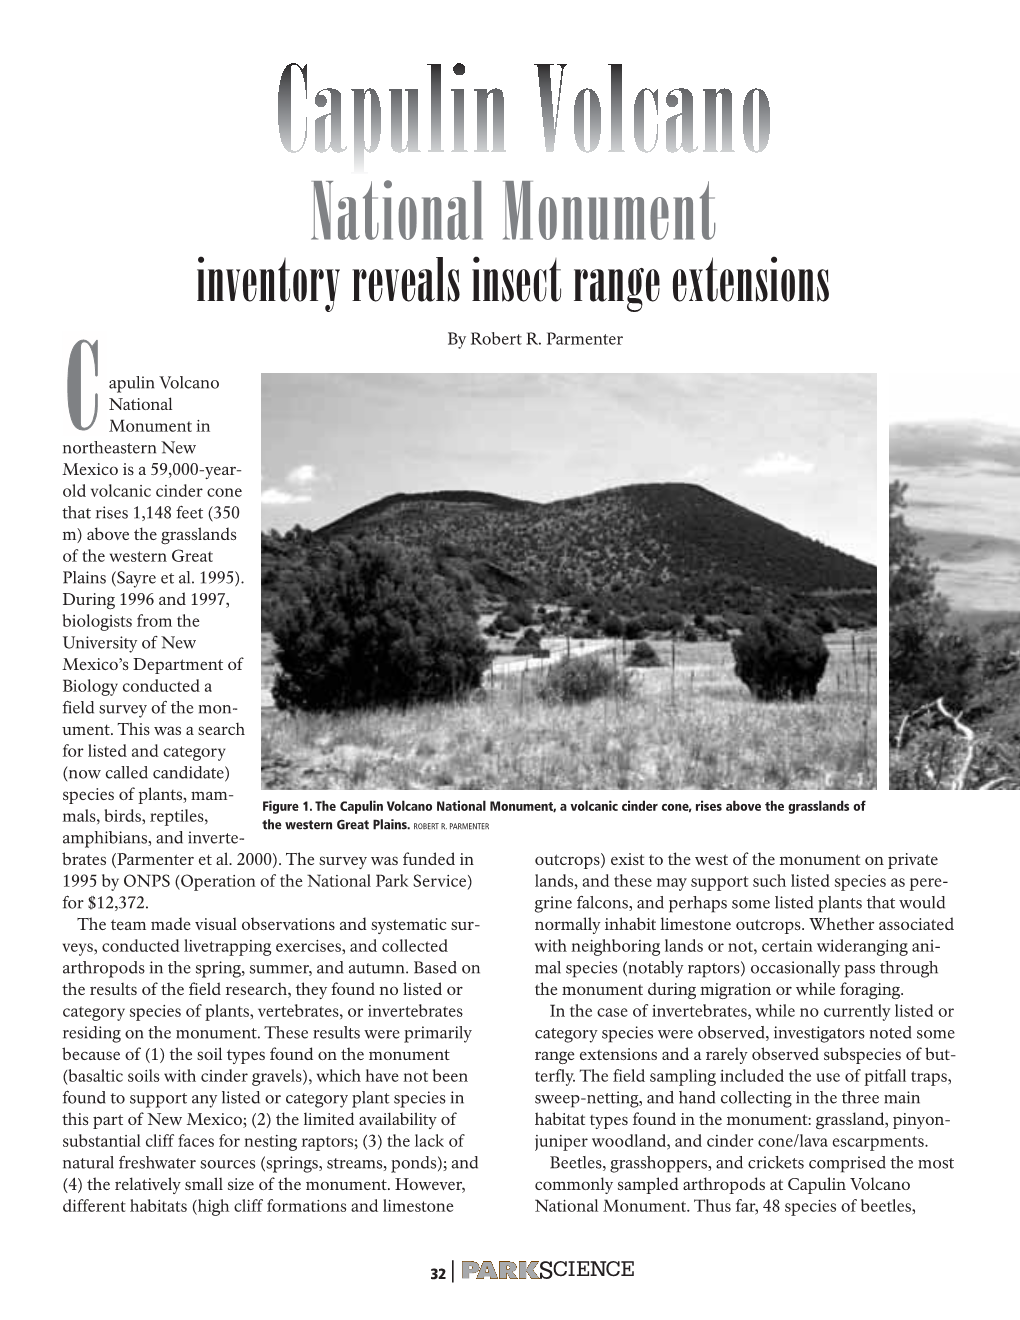 Capulin Volcano National Monument Inventory Reveals Insect Range